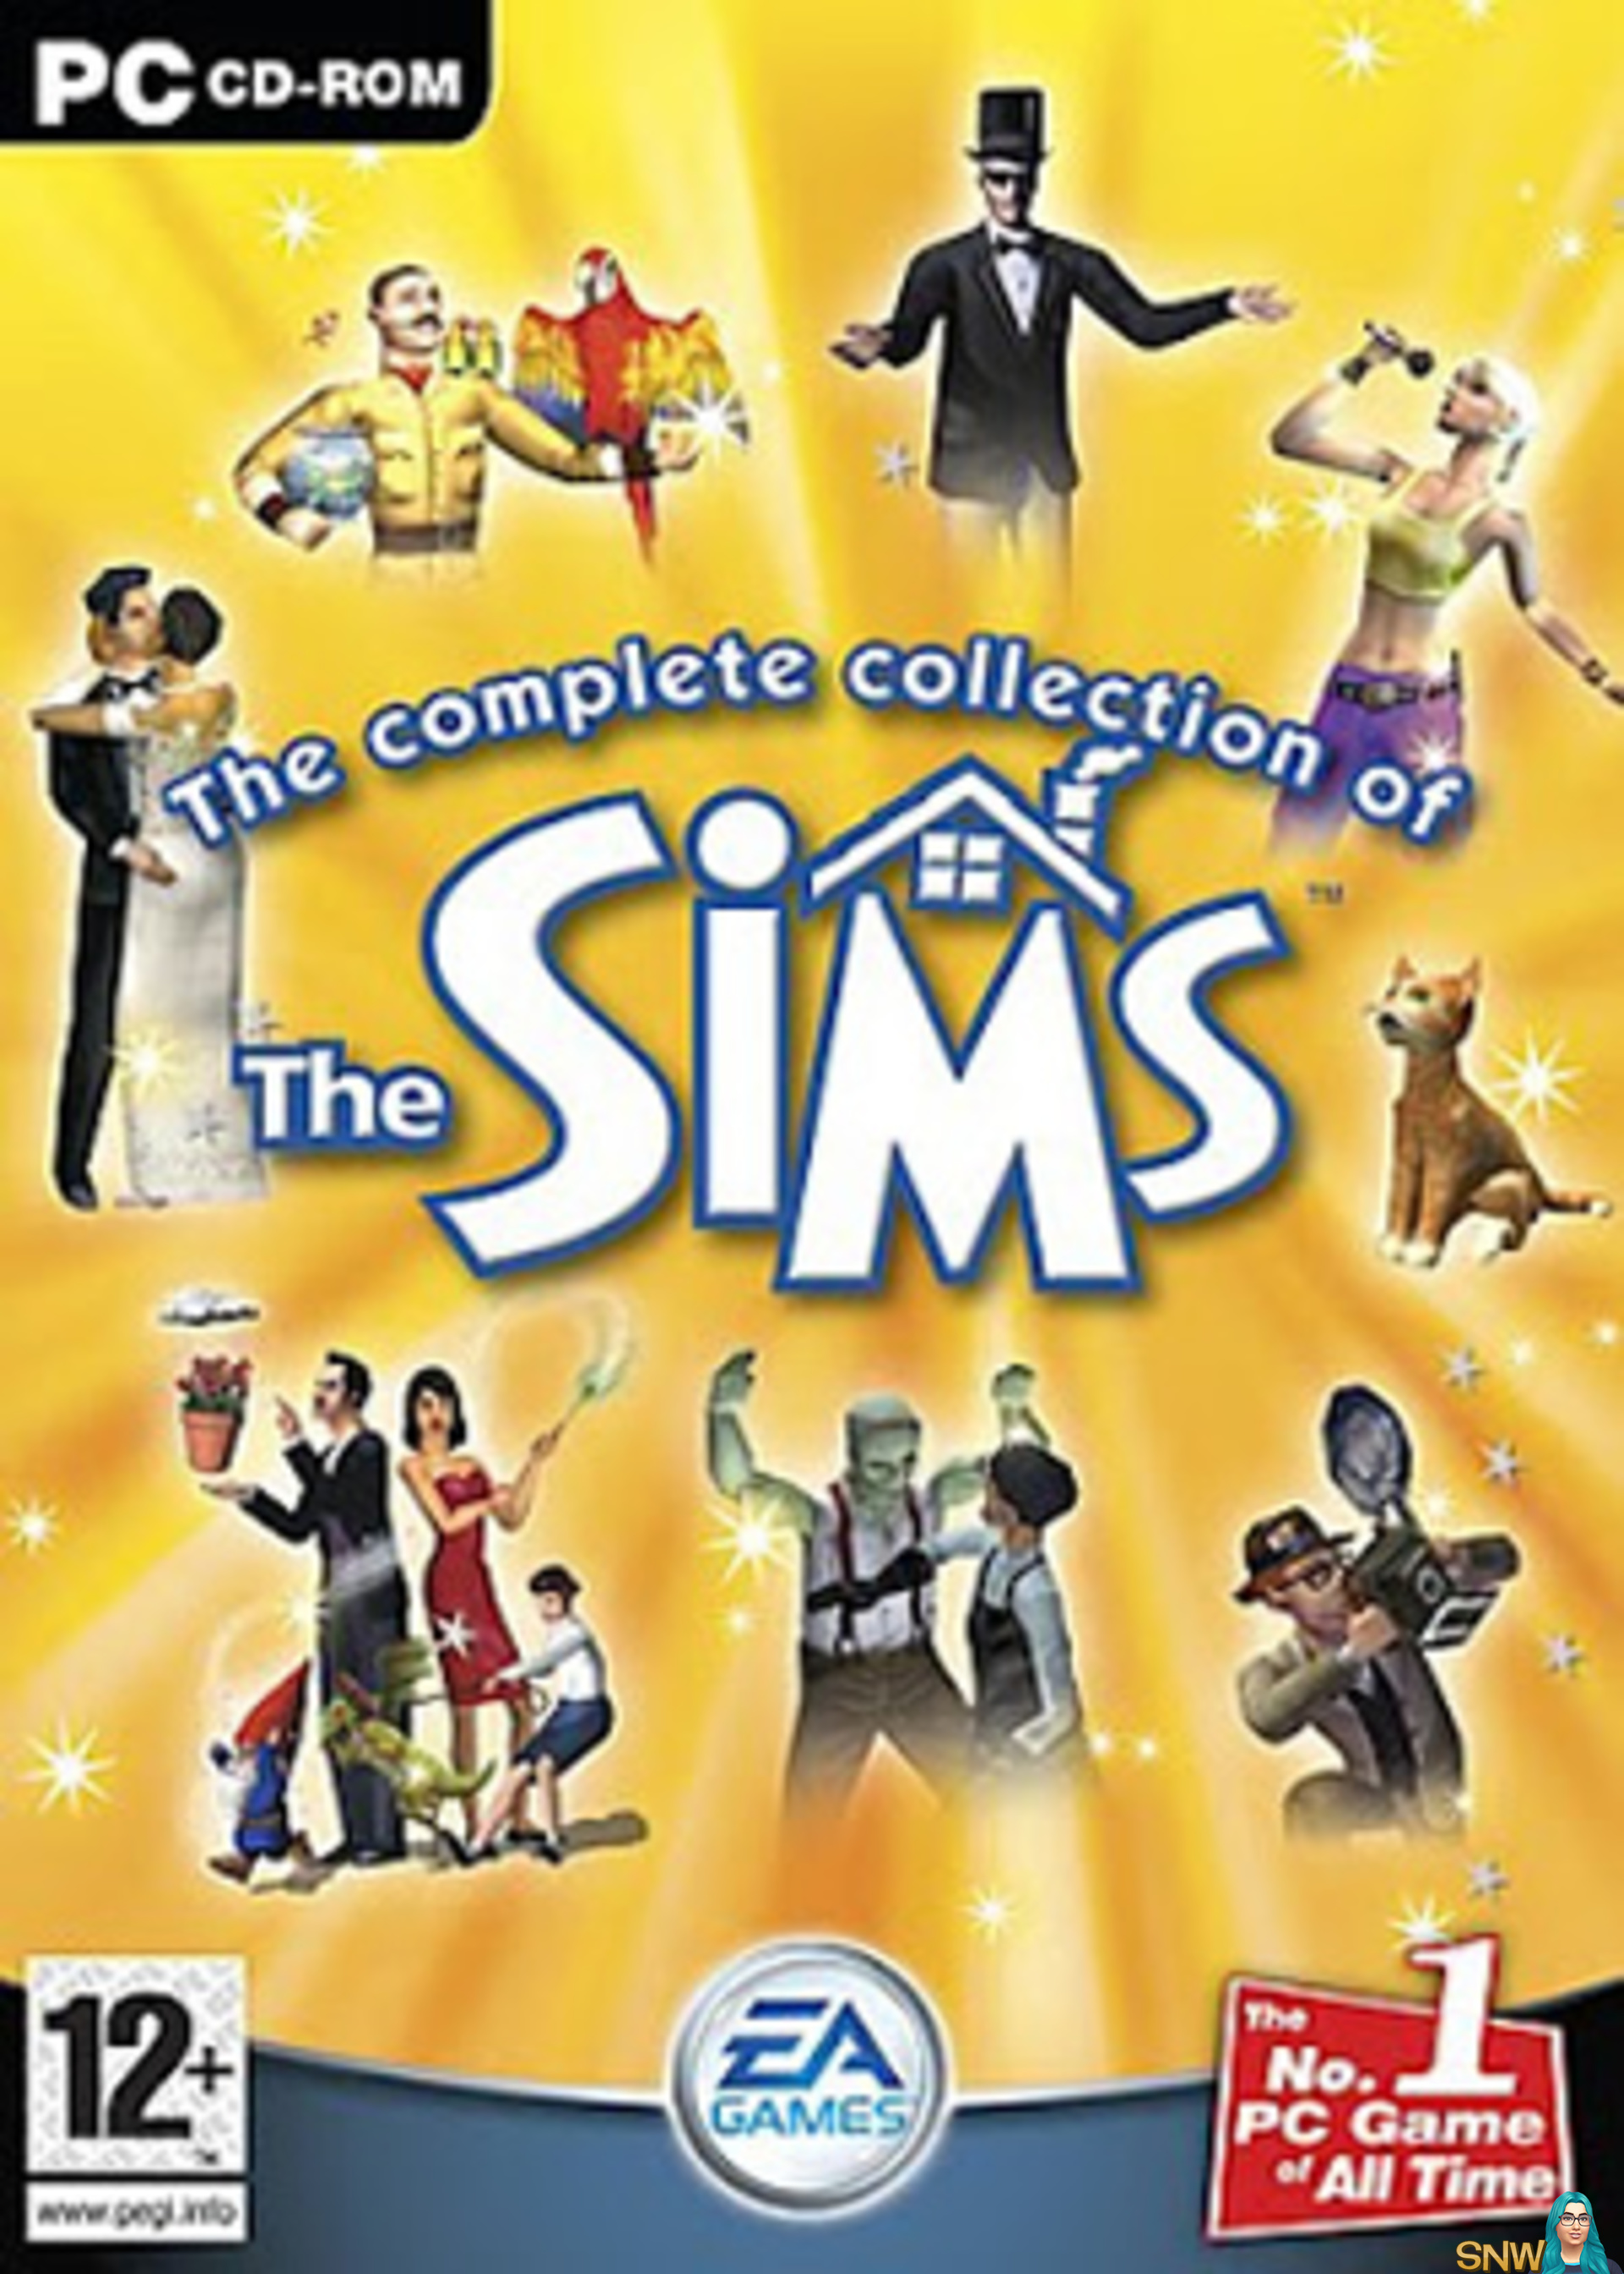 sims complete collection serial numbers